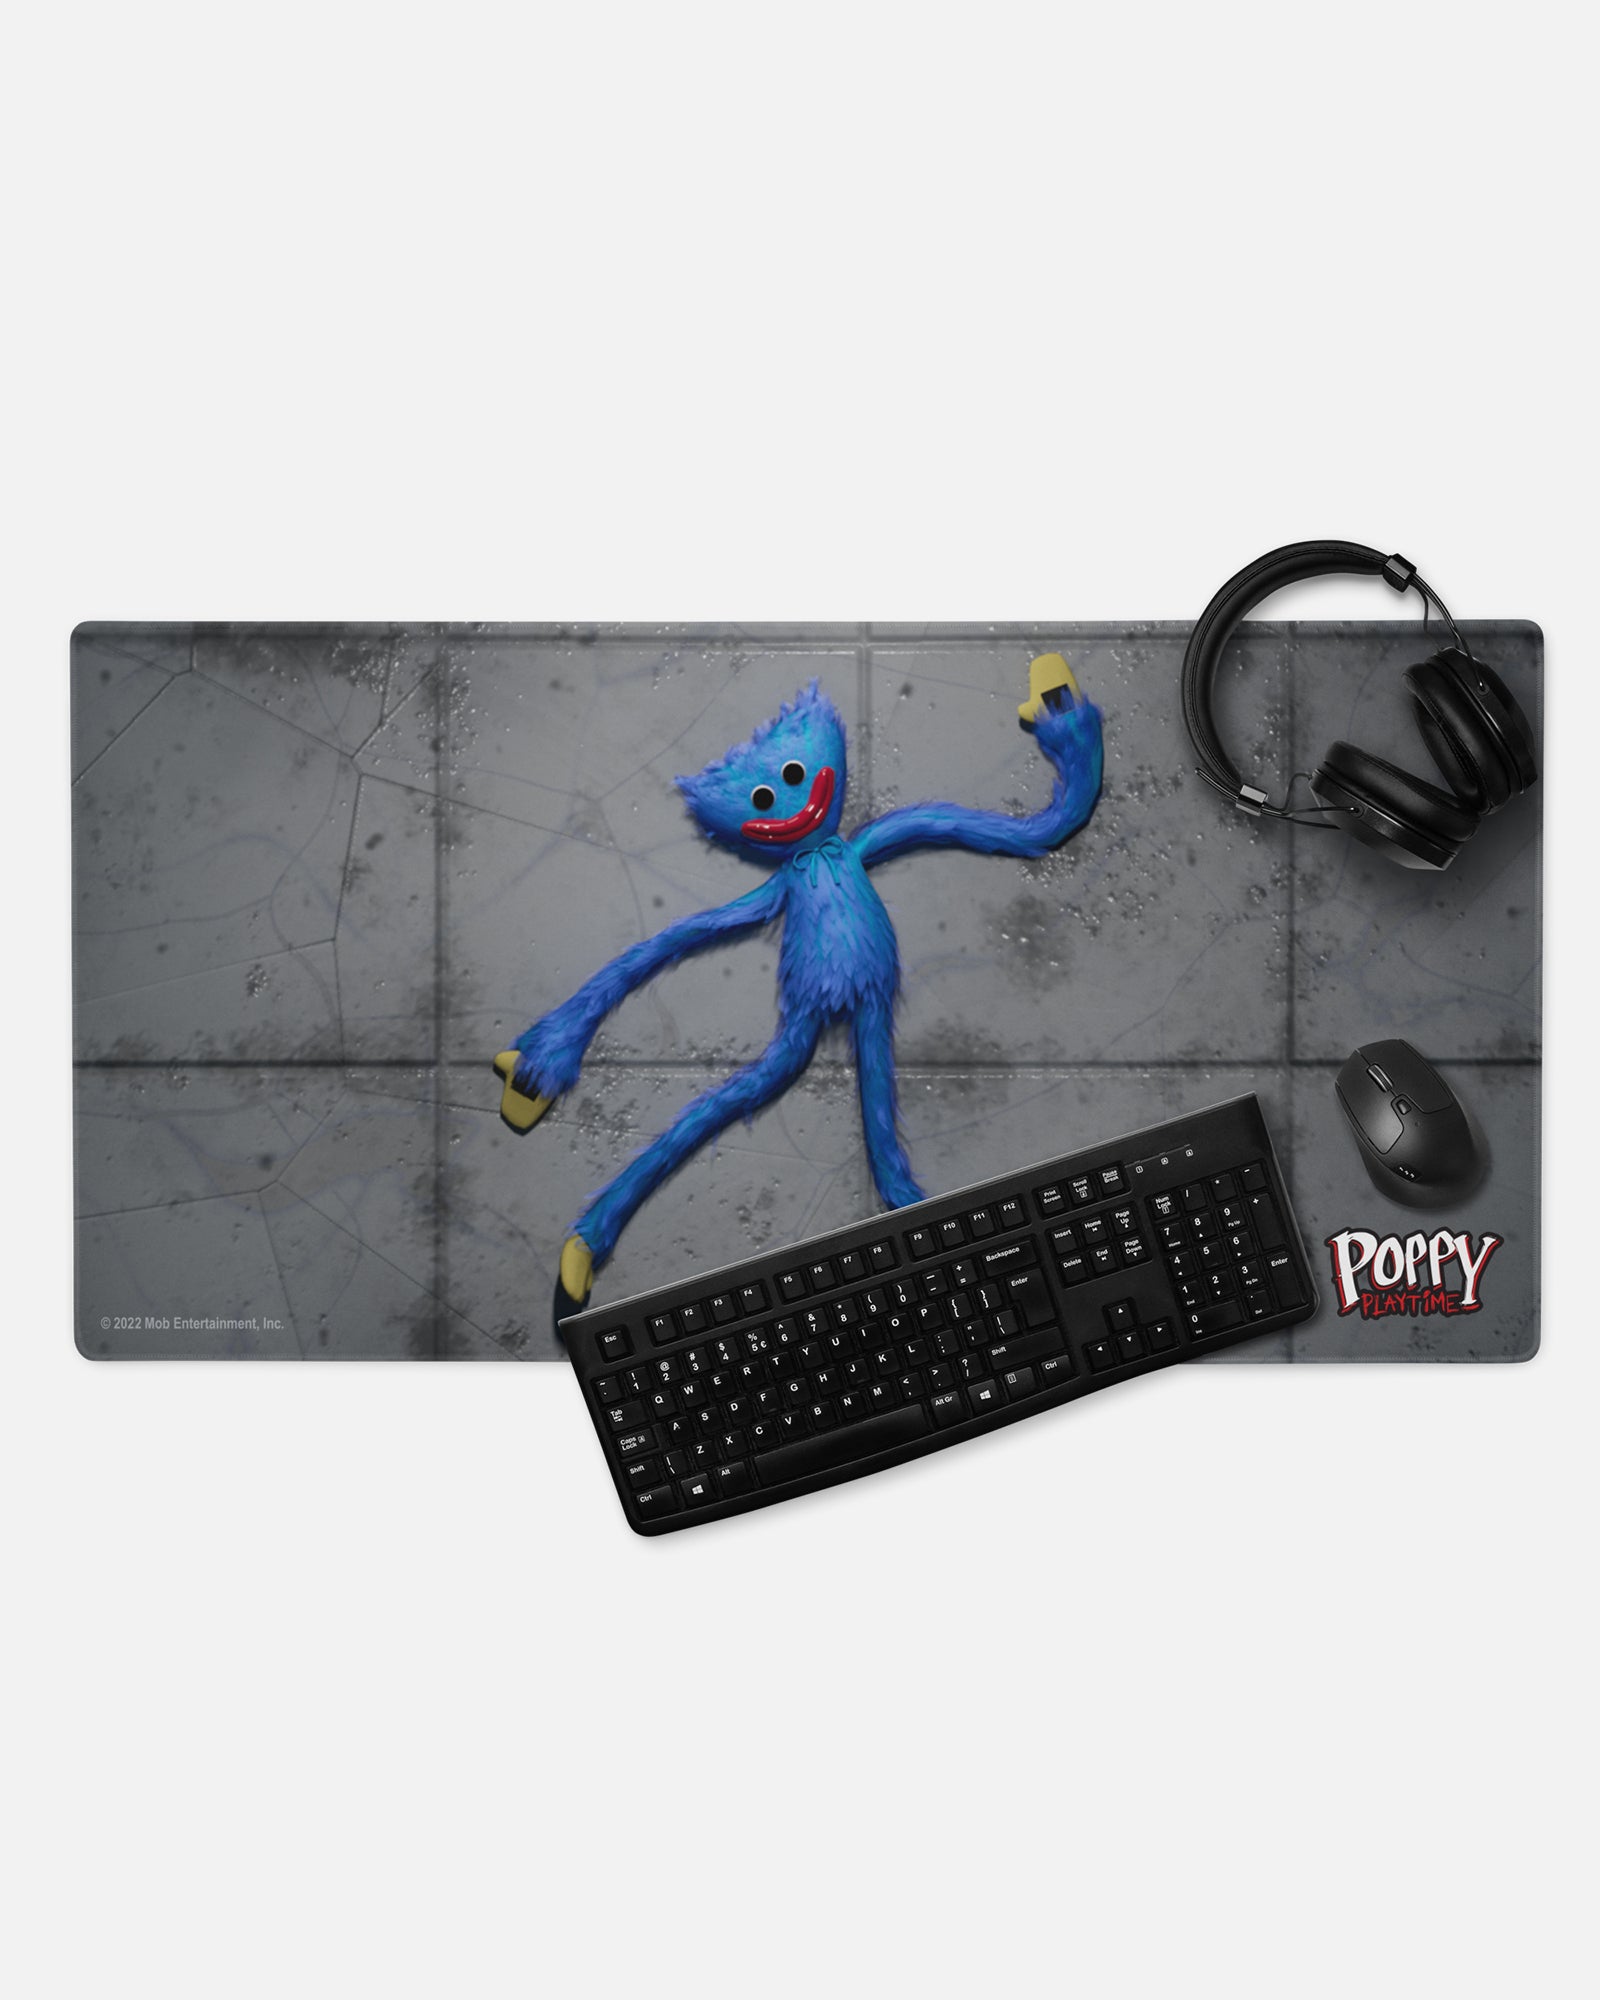 smiling huggy wuggy gamer mousepad with headphones, keyboard, and mouse to show example of gaming set up image: smiling huggy wuggy plush sprawled on concrete floor. text: poppy playtime